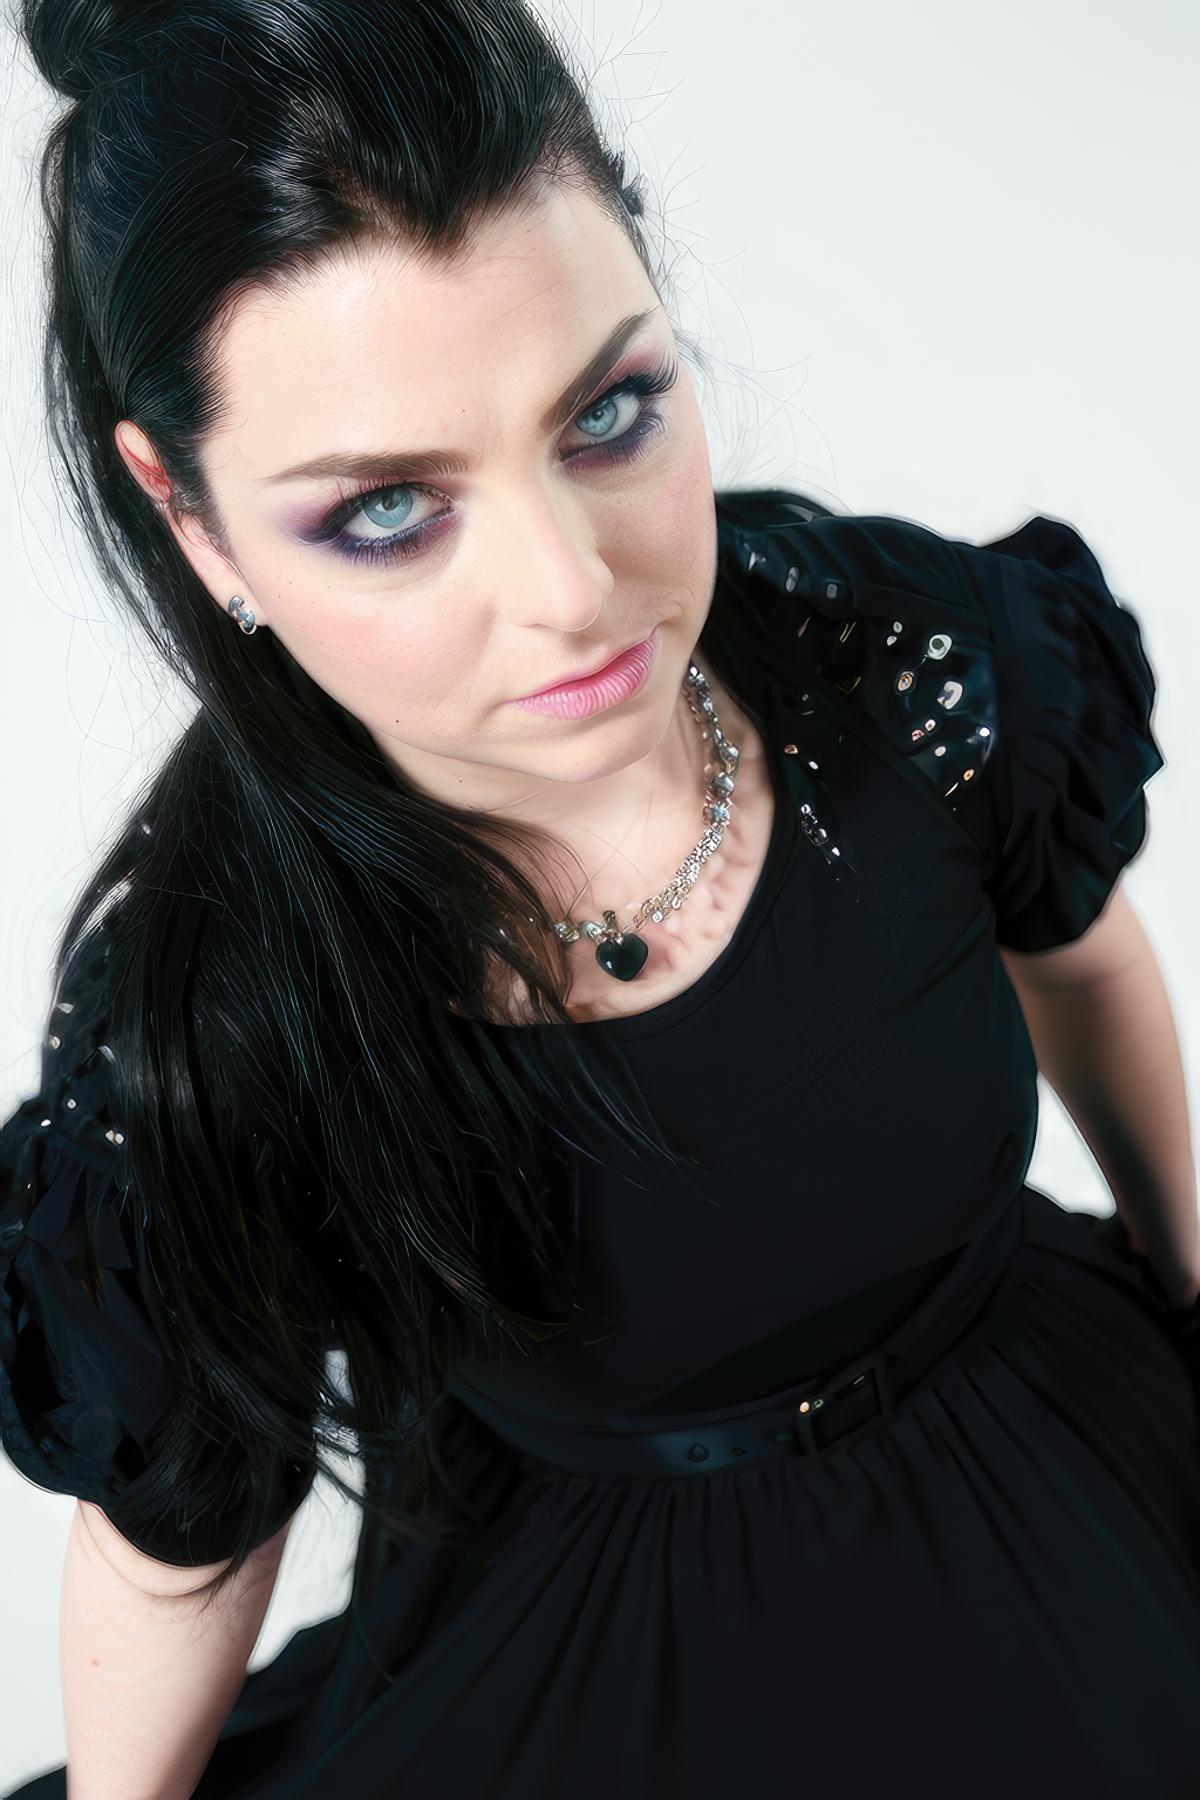 Amy Lee image by simesabaEX